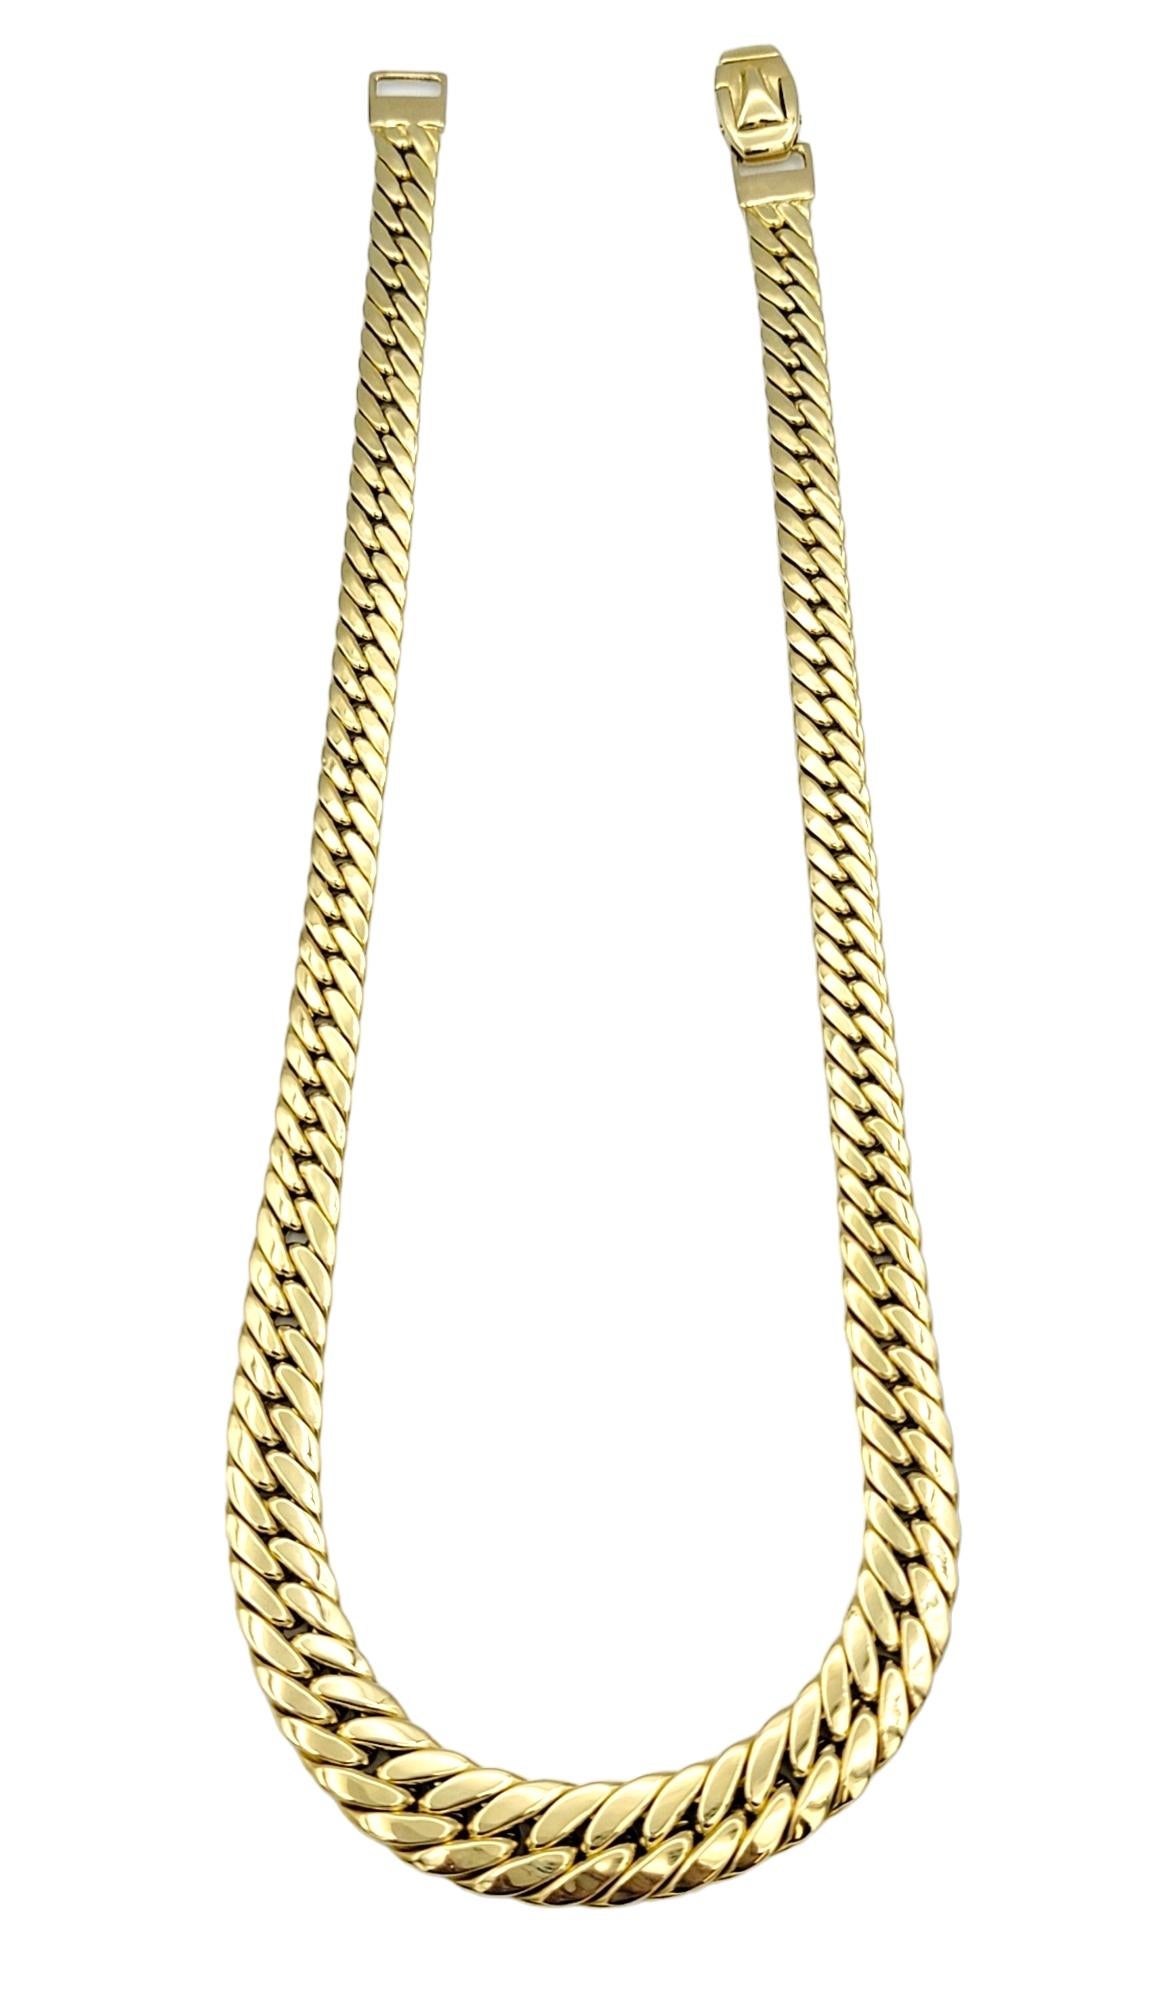 Contemporary Chunky Graduated Curb Link Chain Necklace in Polished 18 Karat Yellow Gold For Sale